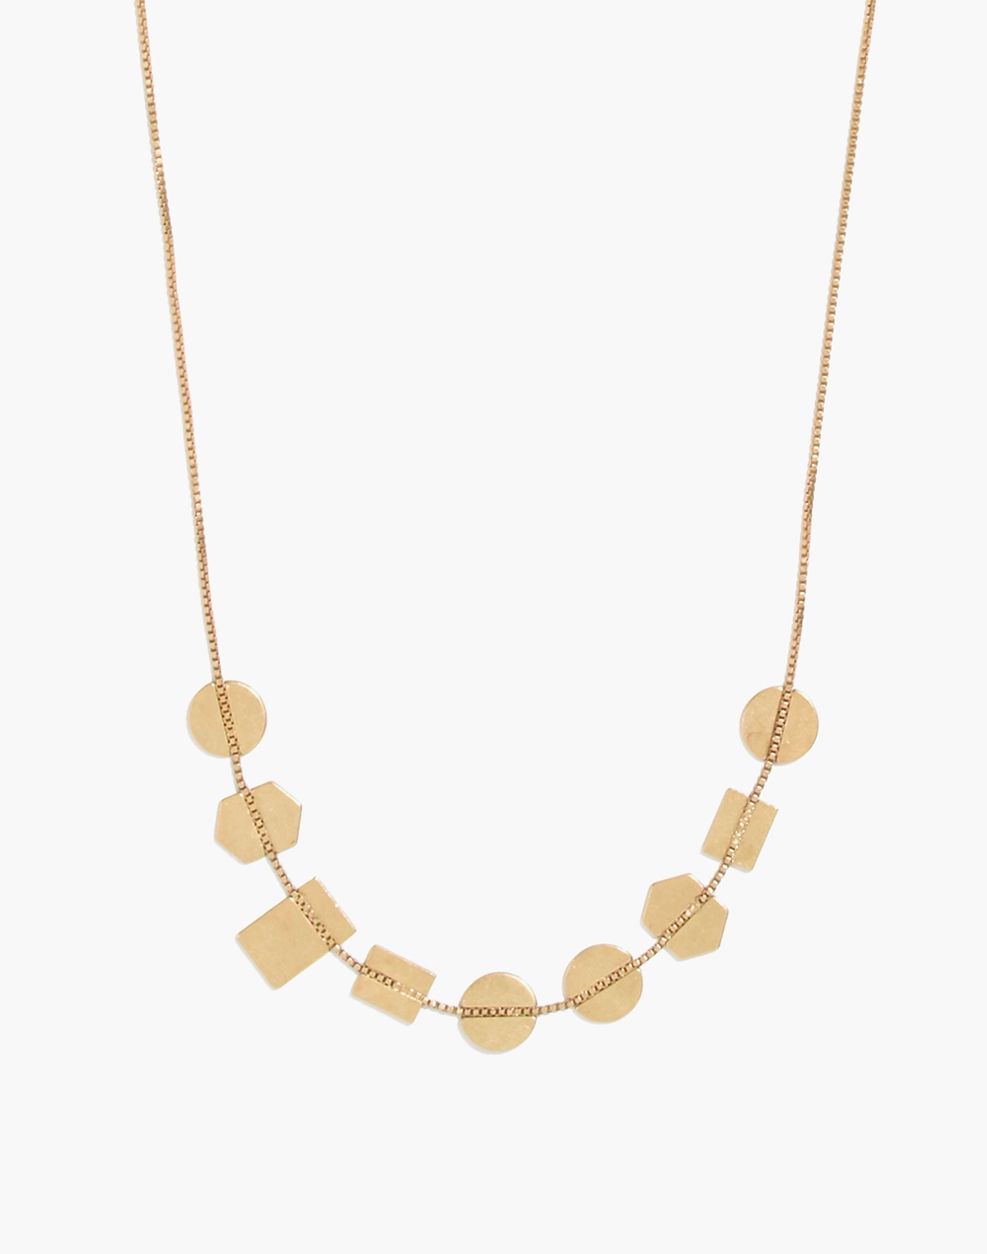 Holding Pattern Necklace | Madewell